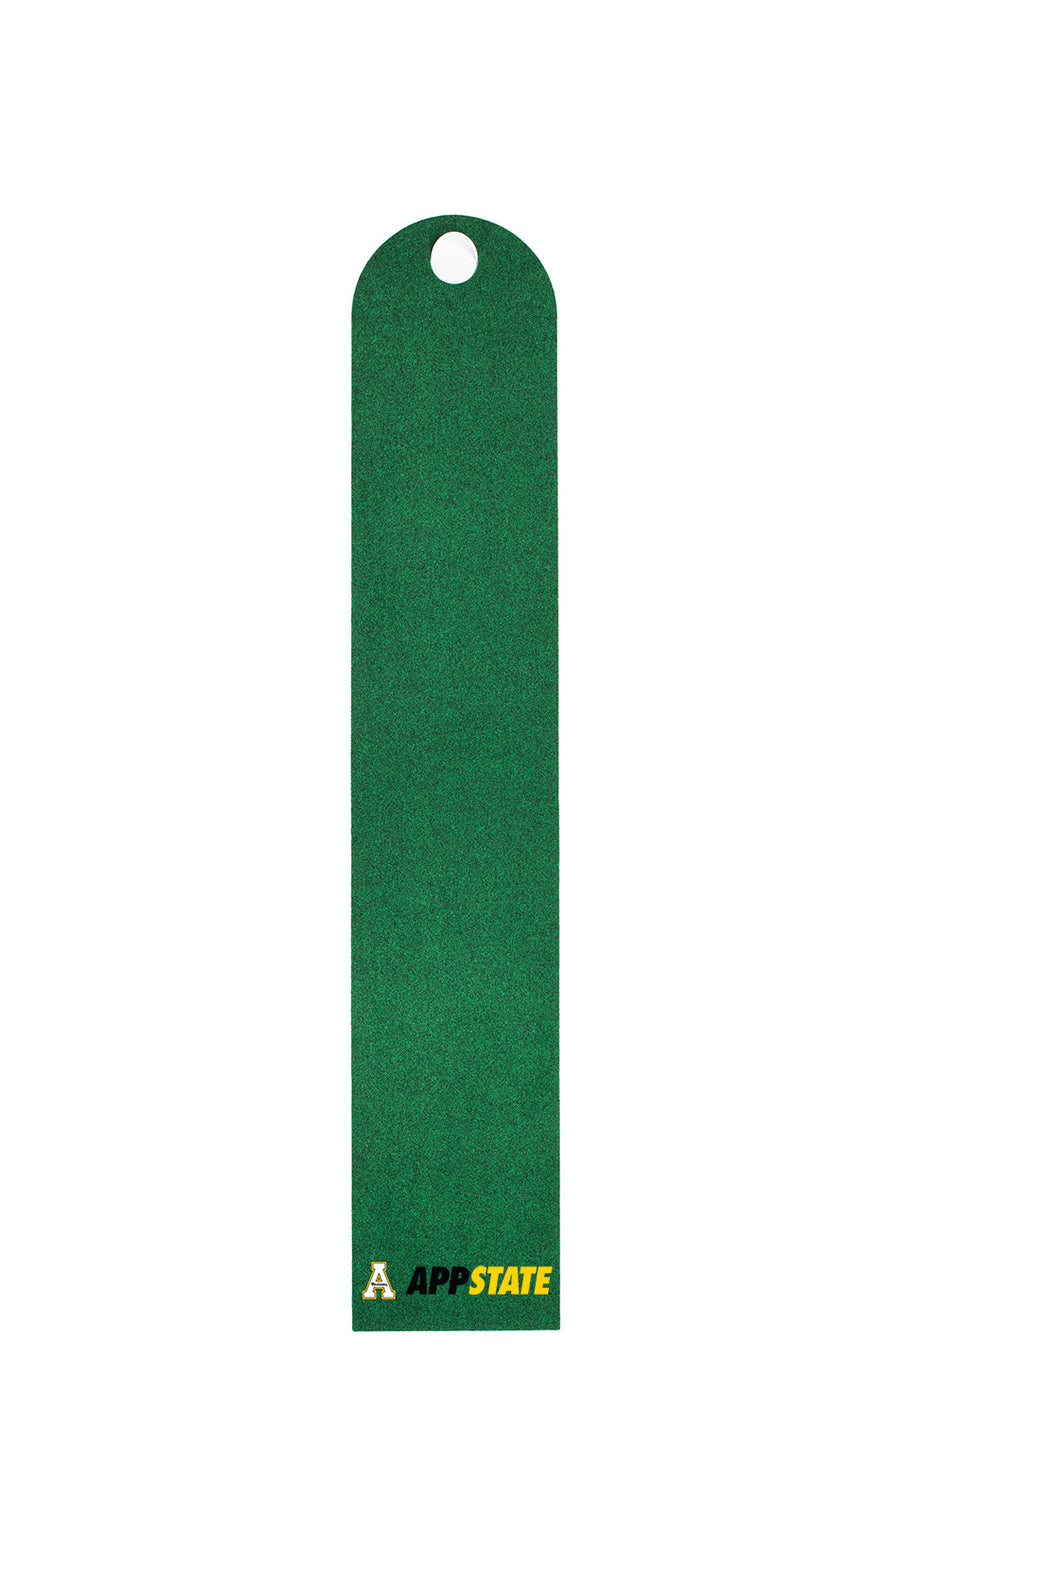 PUTT-A-BOUT Collegiate Collection PG158 Putting Green - Appalachian State University Putting Mat